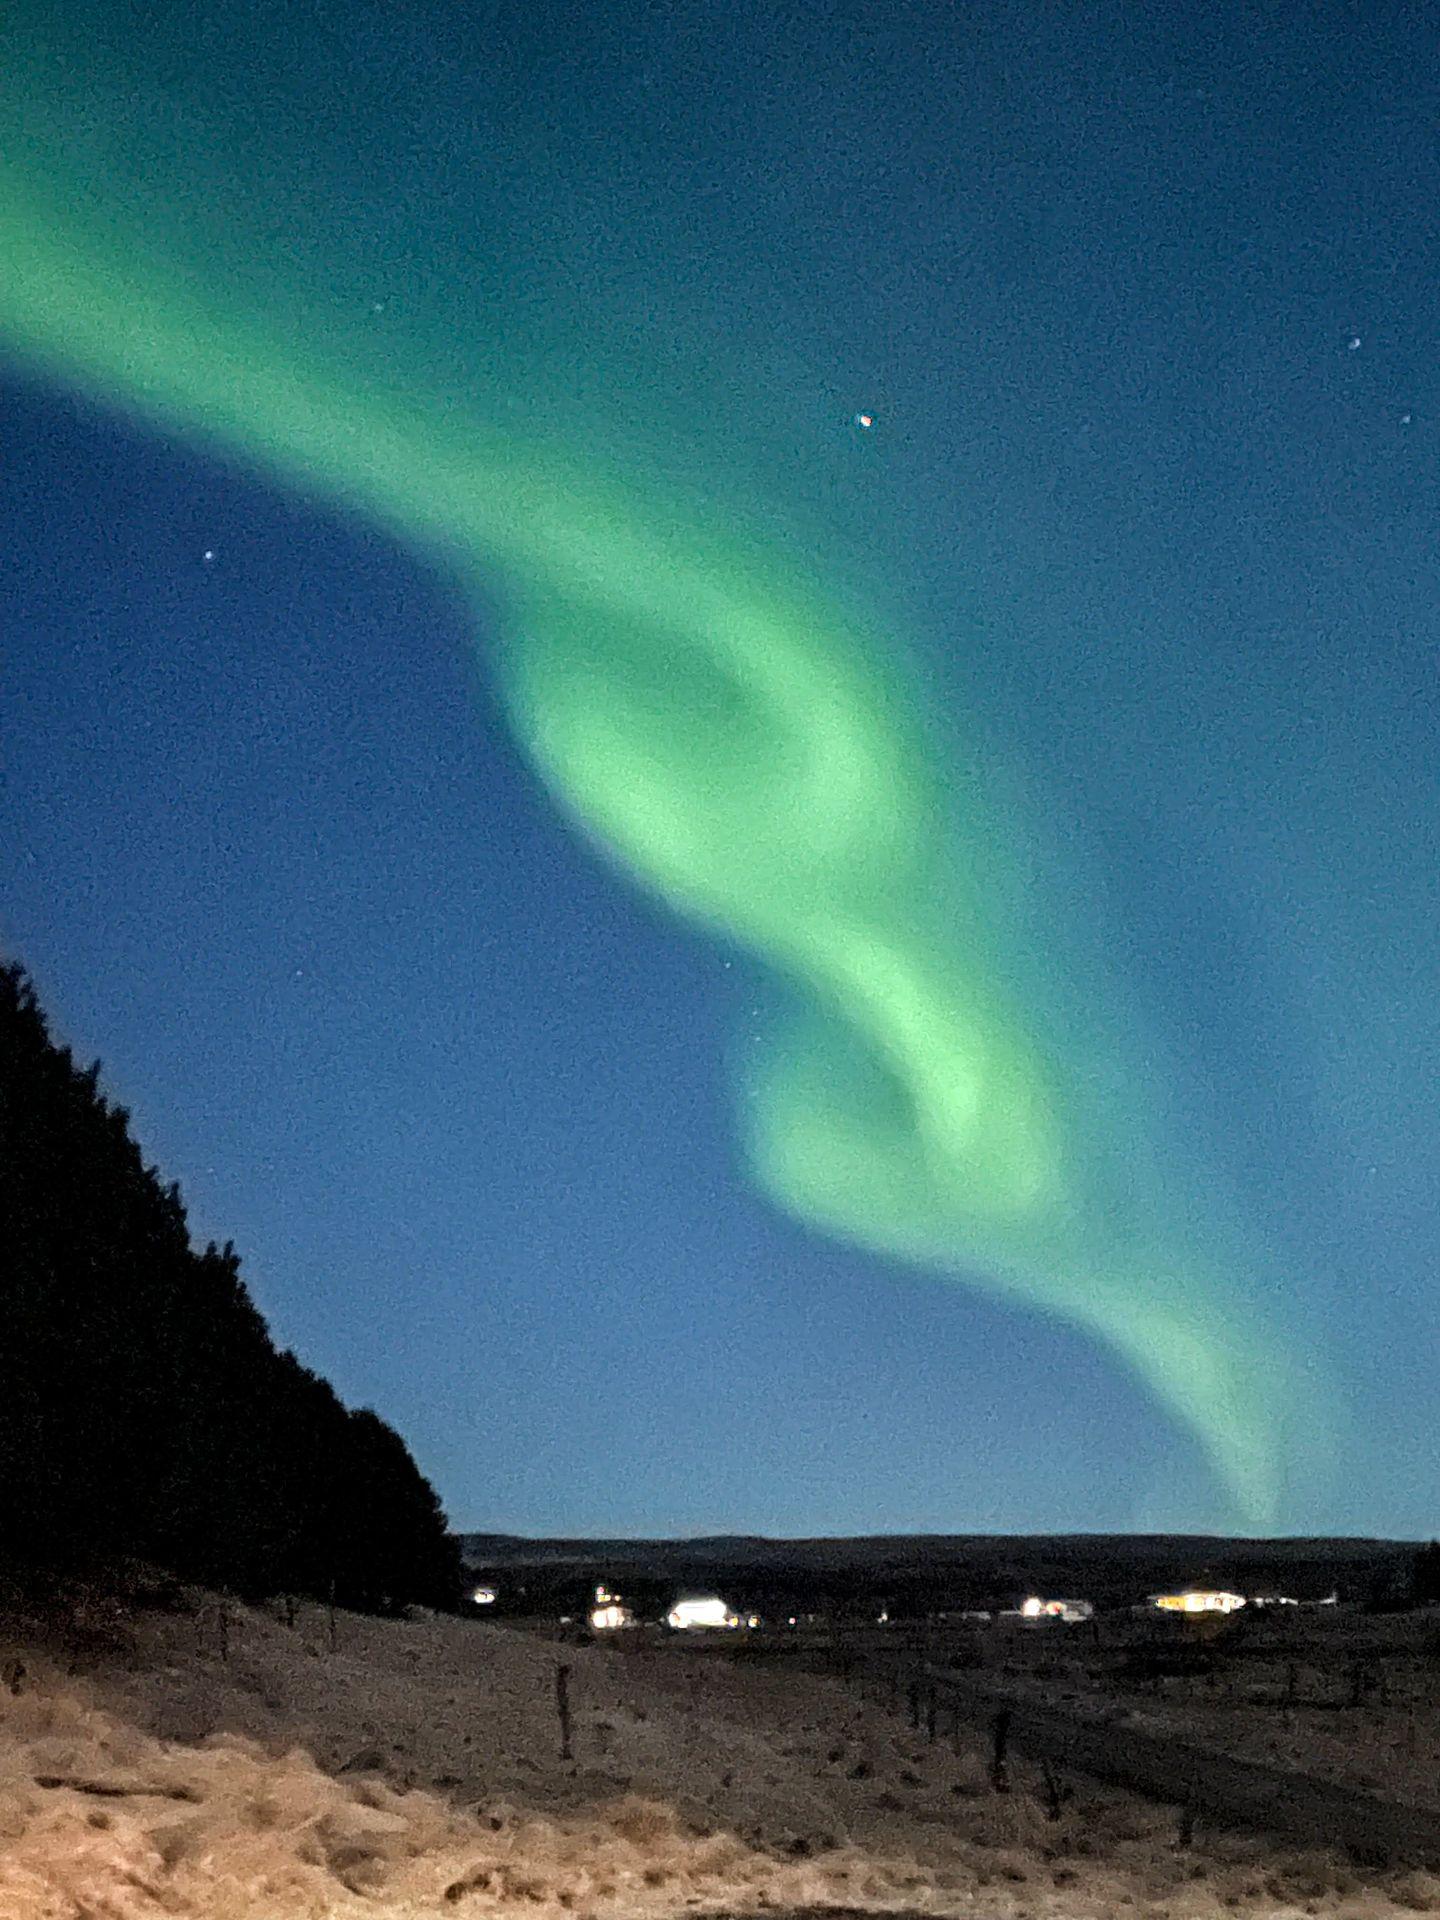 A green display of the Northern Lights. The lights twist around in a way that looks like a rope.